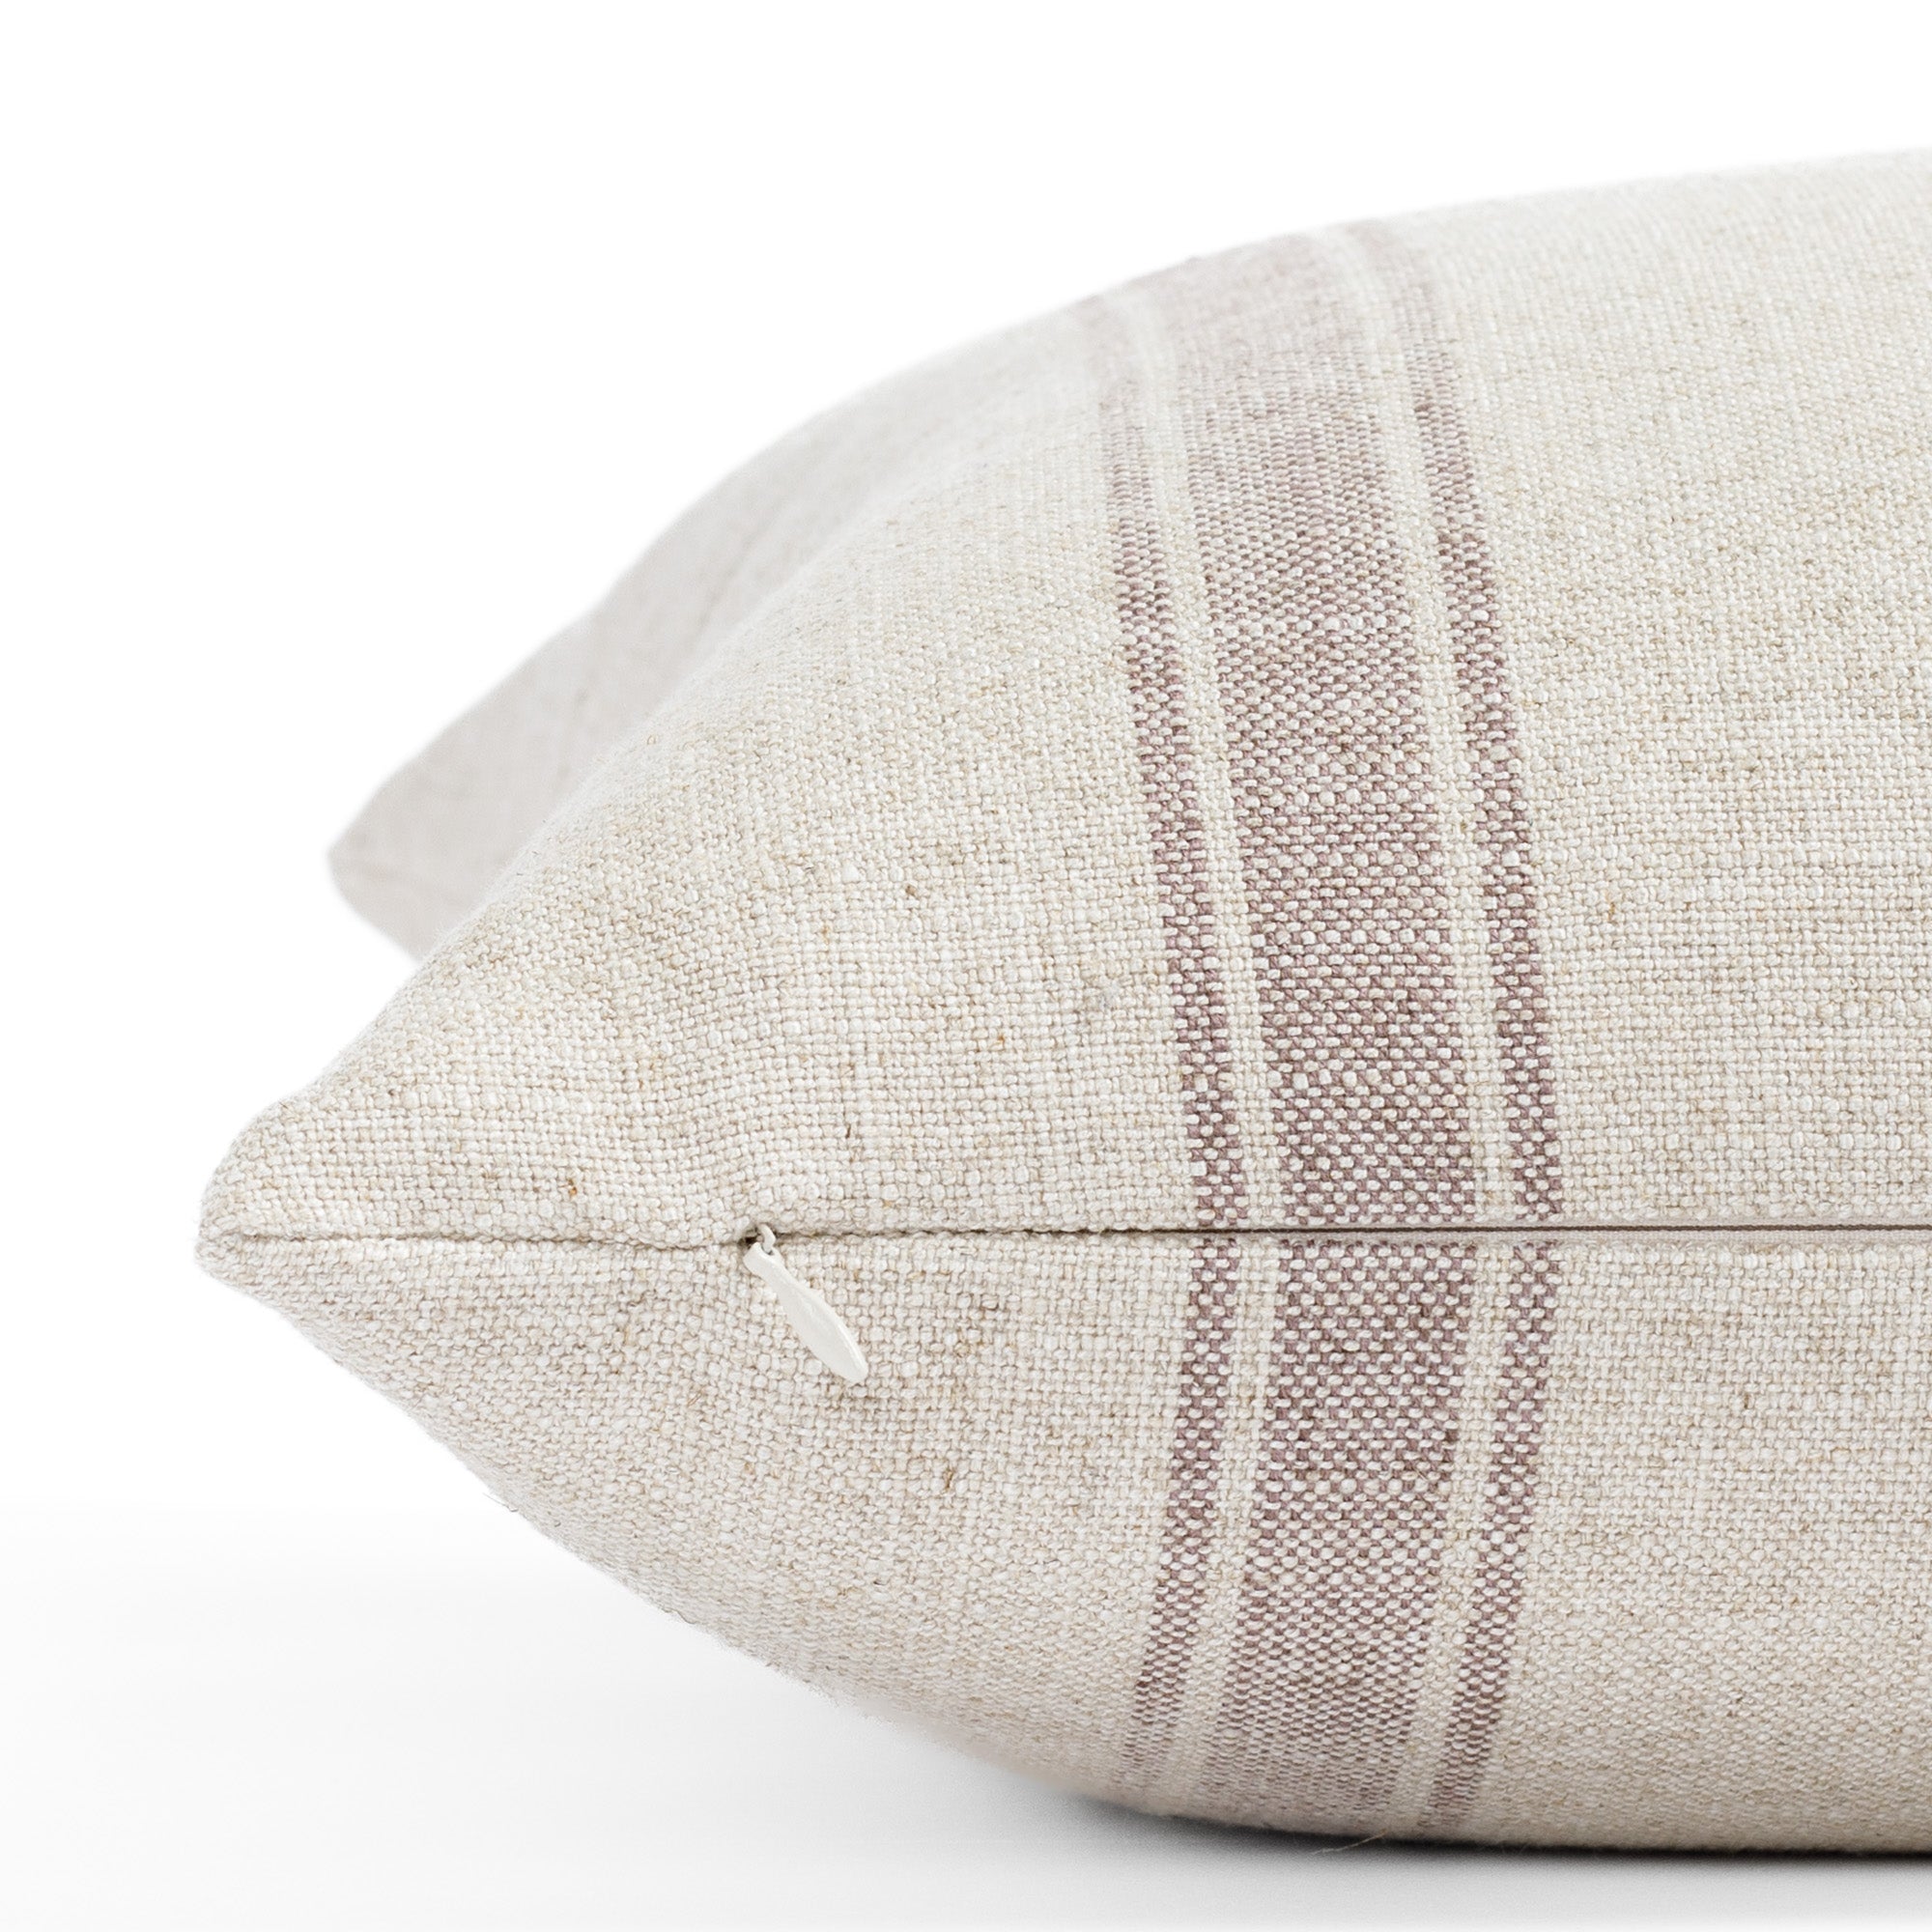 a soft purple and oatmeal striped throw pillow : close up zipper view